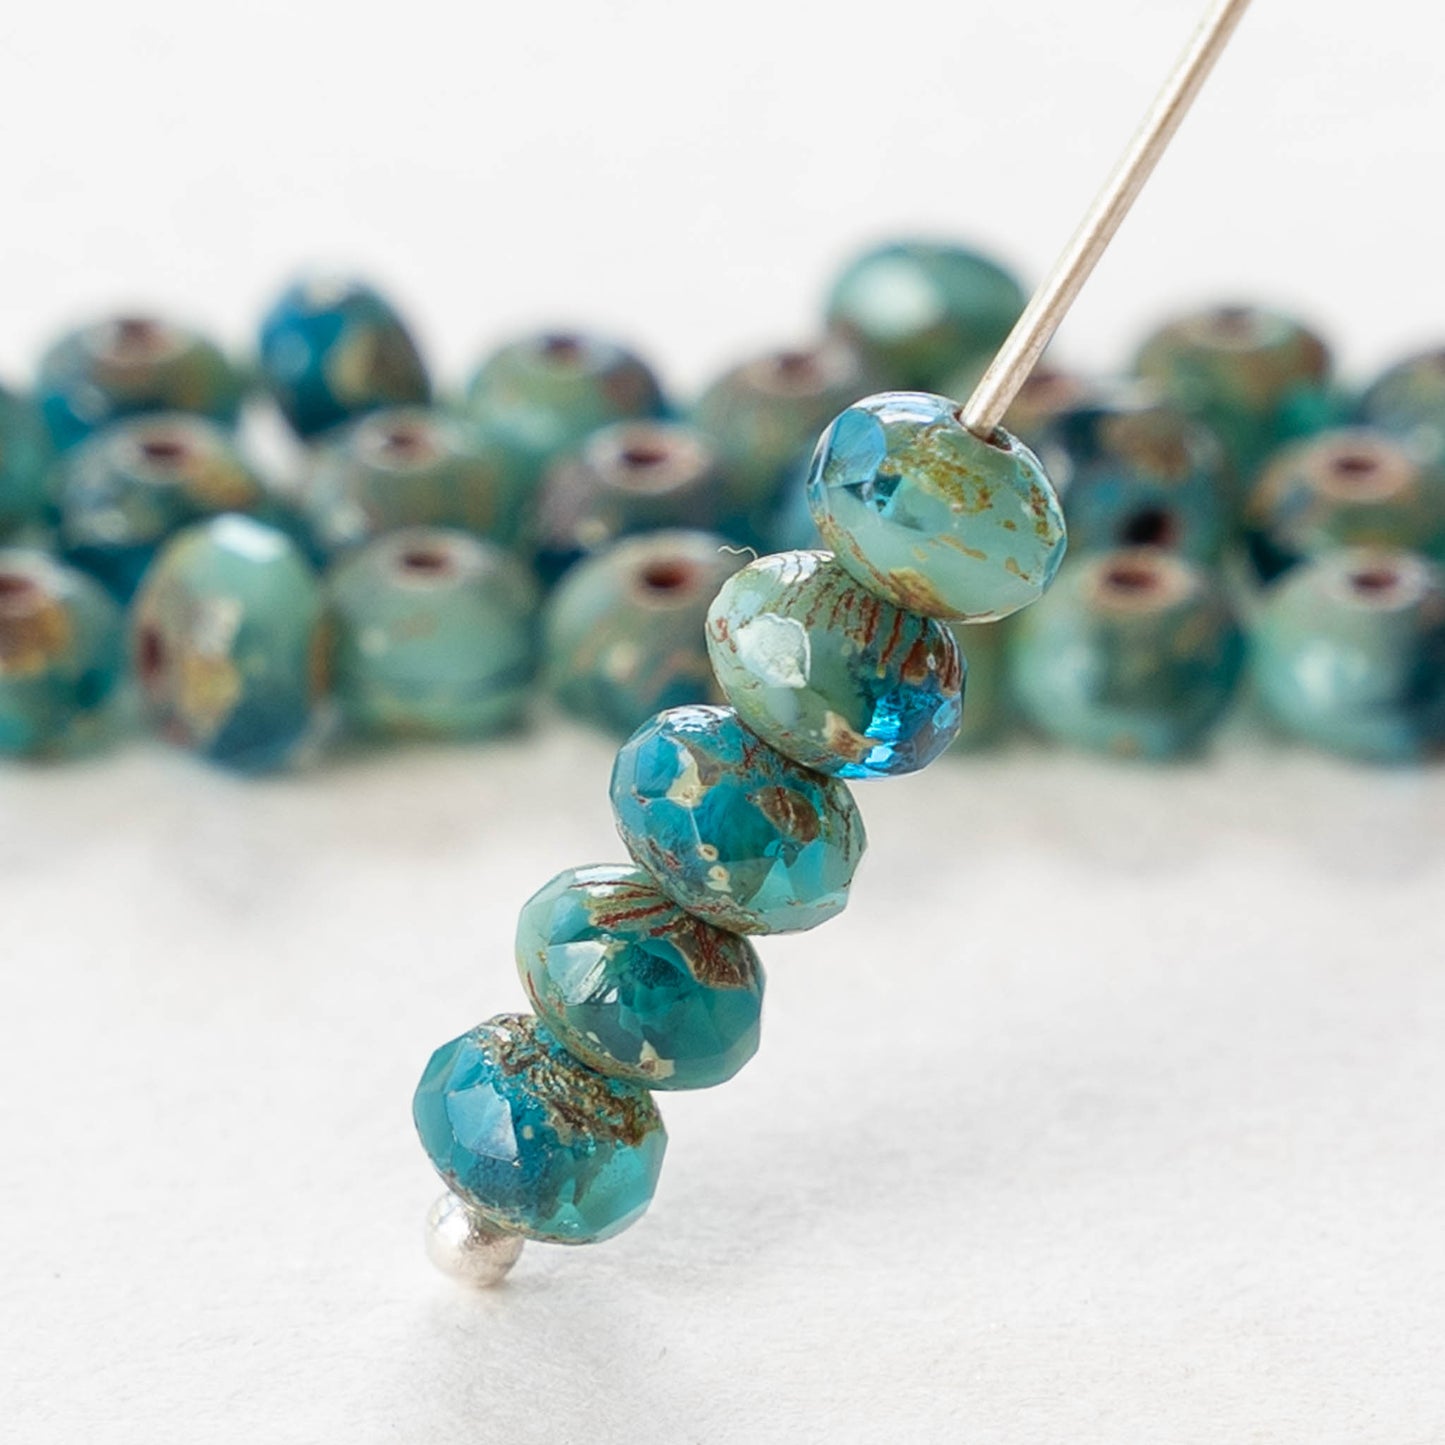 3x5mm Rondelle -  Turquoise Blue Picasso Mix - 30 Beads